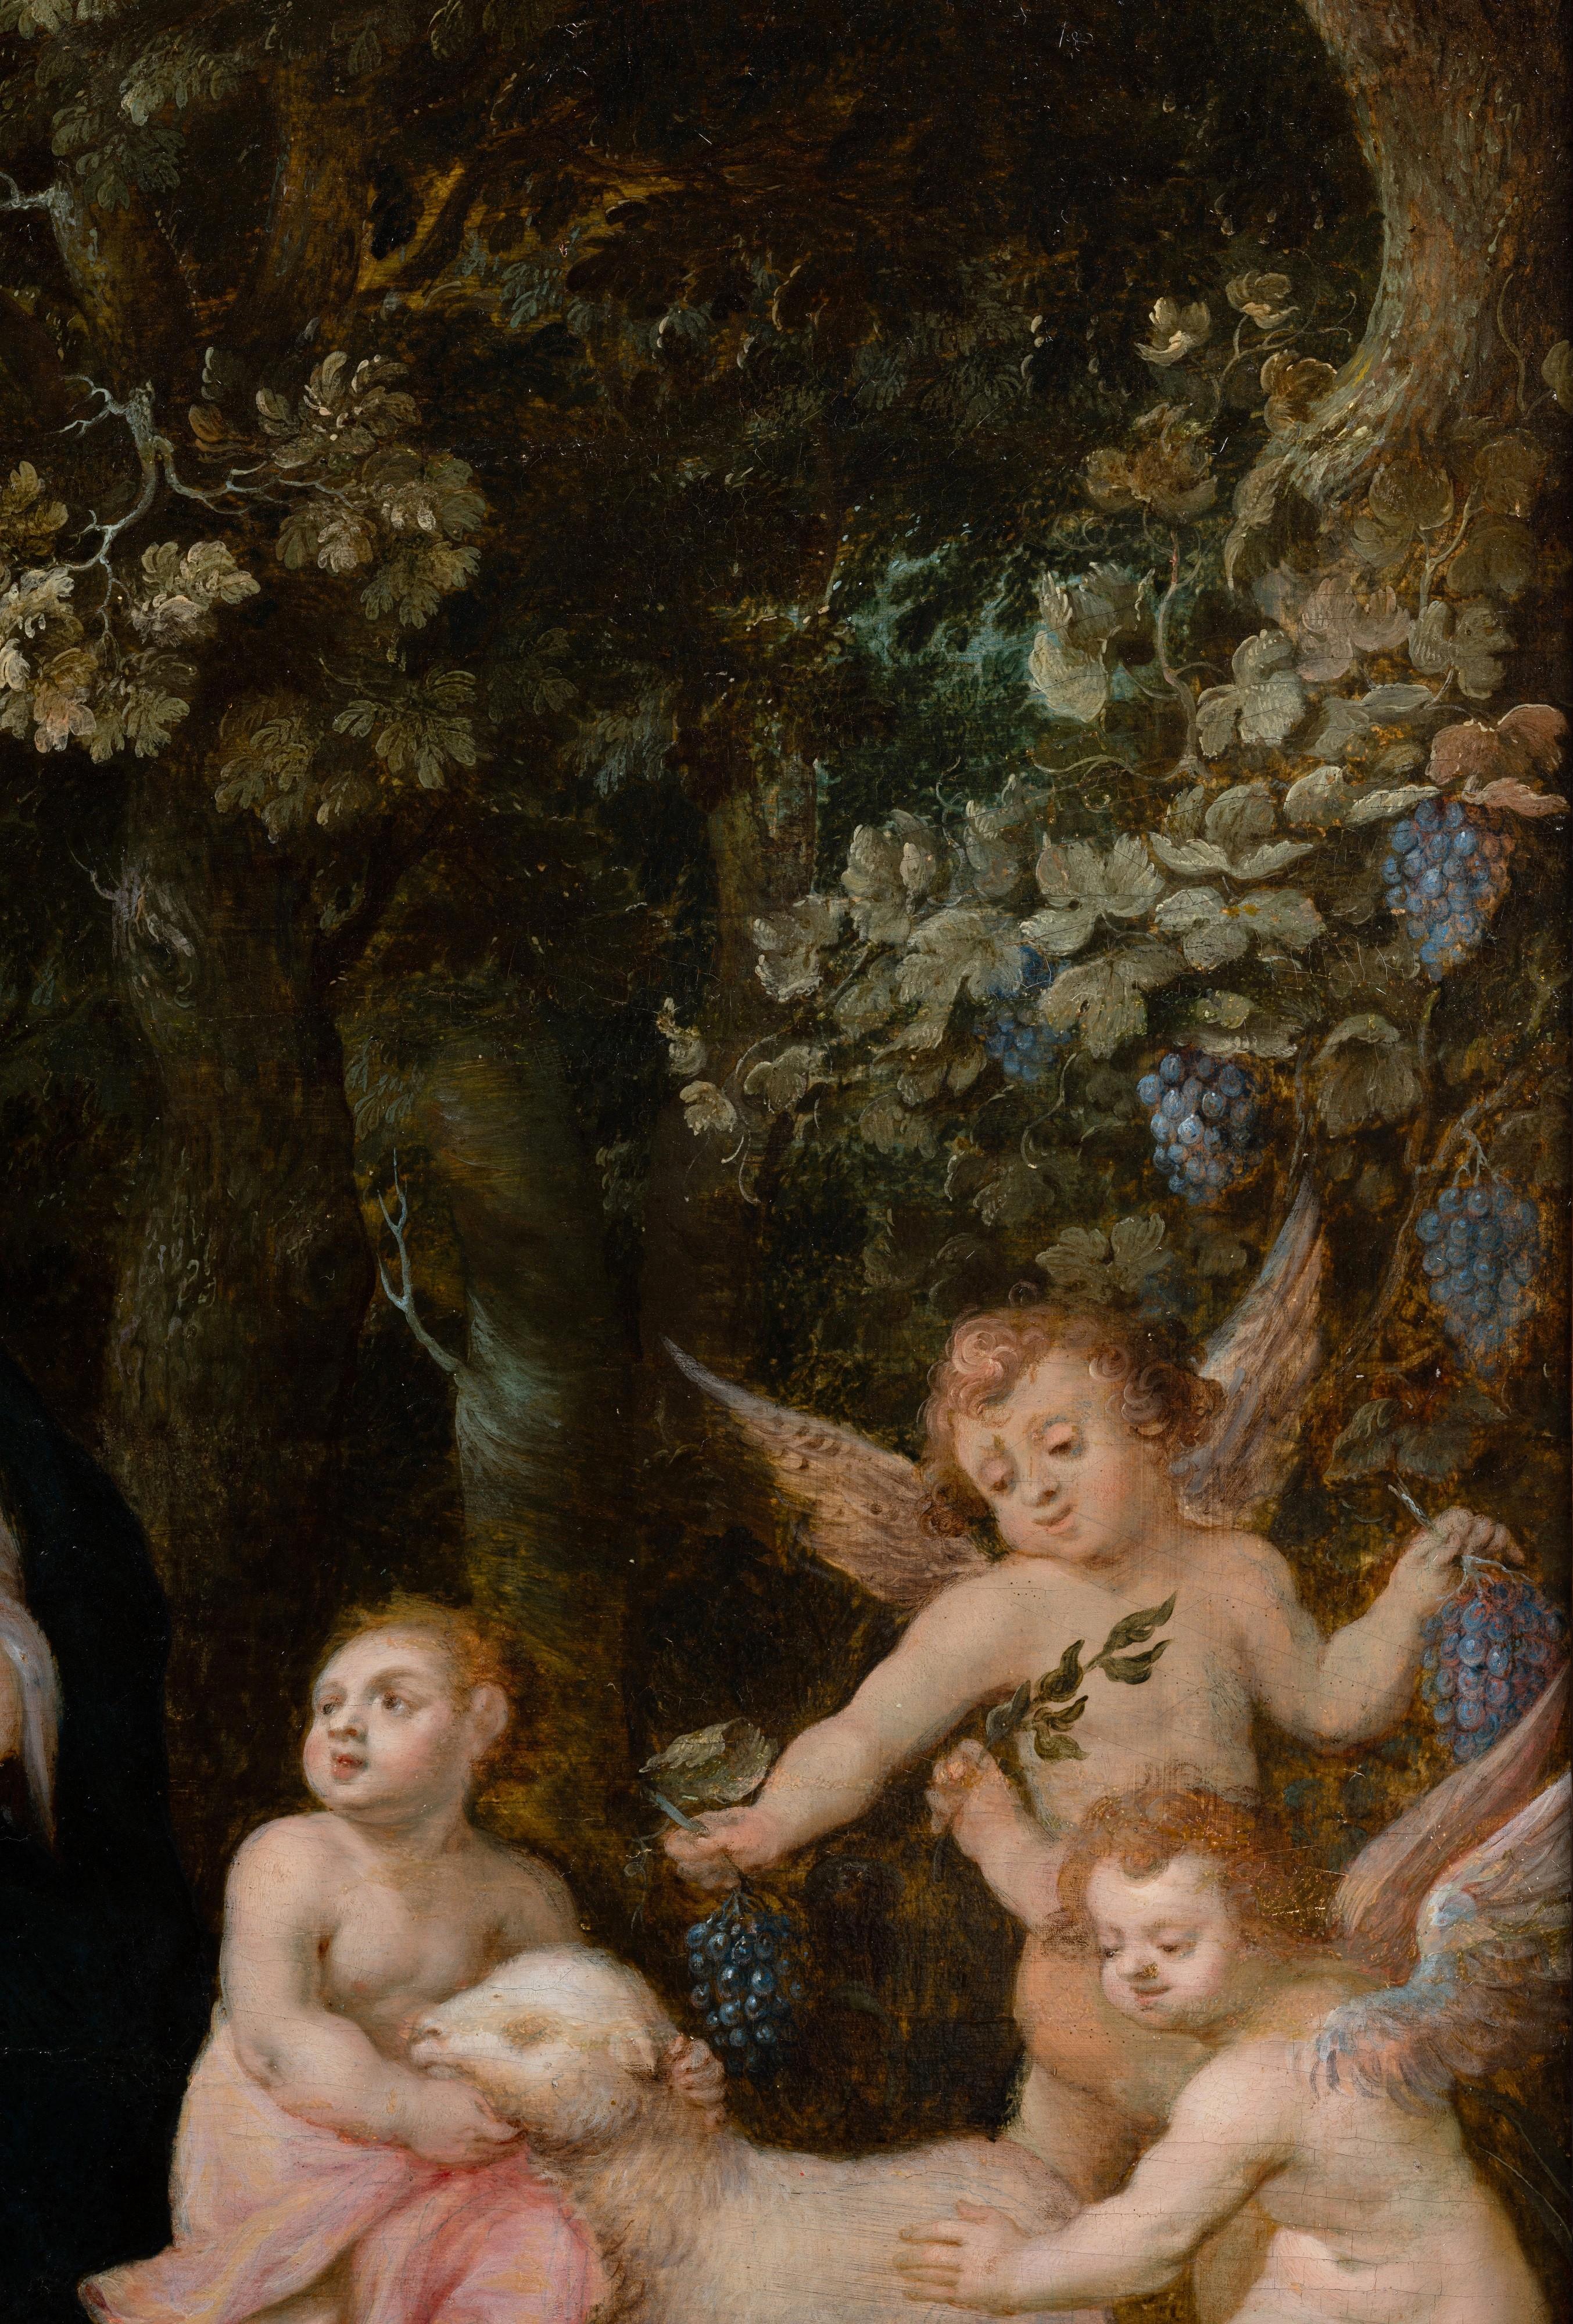 Workshop of Jan Brueghel the Younger (1601-1678) & Hendrick van Balen (Antwerp, 1575 – 1632)
17th century Antwerp School
The Virgin and Child with Saint John the Baptist Surrounded by Angels in a Landscape
Oil on oak panel: h. 54 cm (21.26in), w.